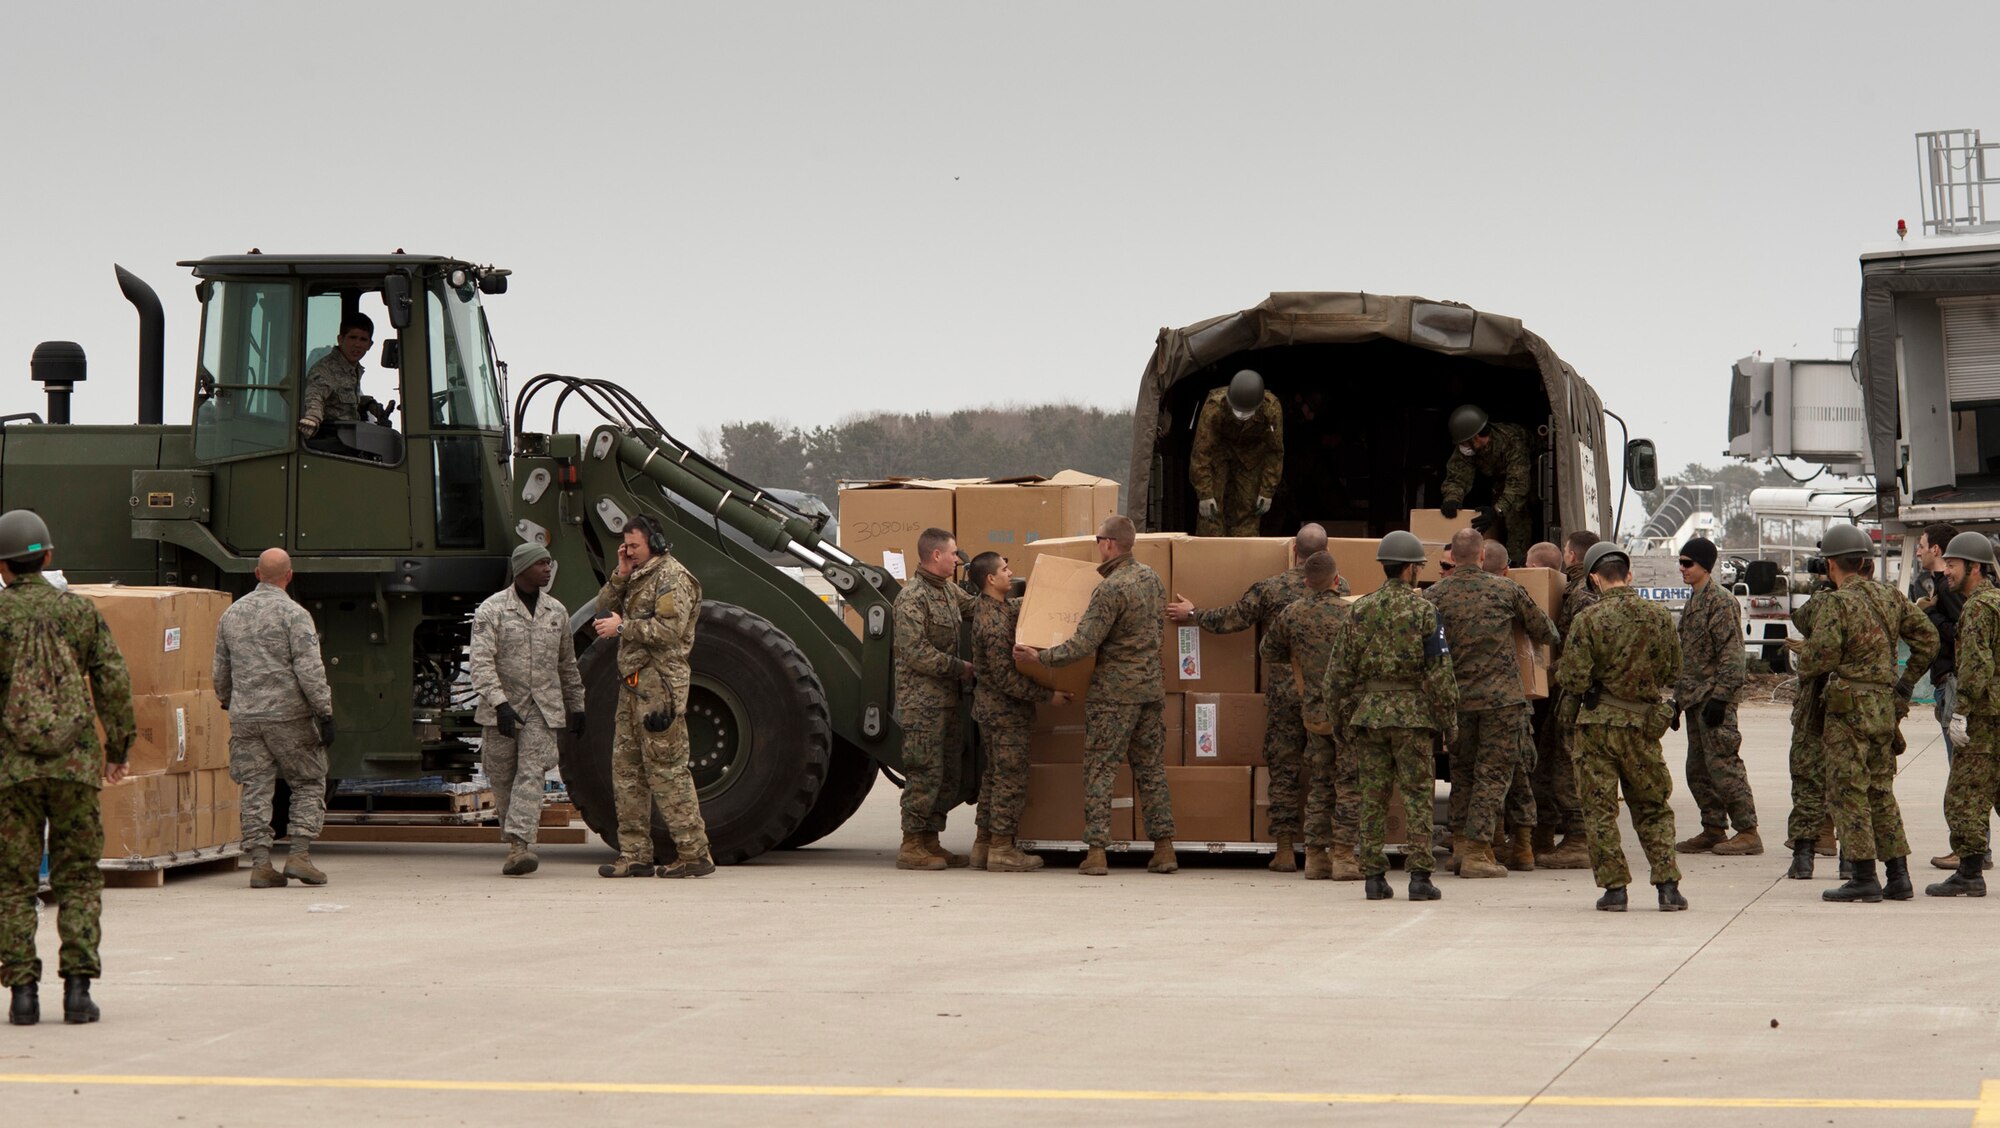 Airmen, Marines and Japan Ground Self-Defense Force soldiers load cargo onto a JGSDF truck at Sendai Airport, Japan, March 20. Since the reopening of Sendai Airport March 16, humanitarian aid supporting Operation Tomodachi has been able to be airlifted in more quickly and directly. (U.S. Air Force photo/Staff Sgt. Samuel Morse)